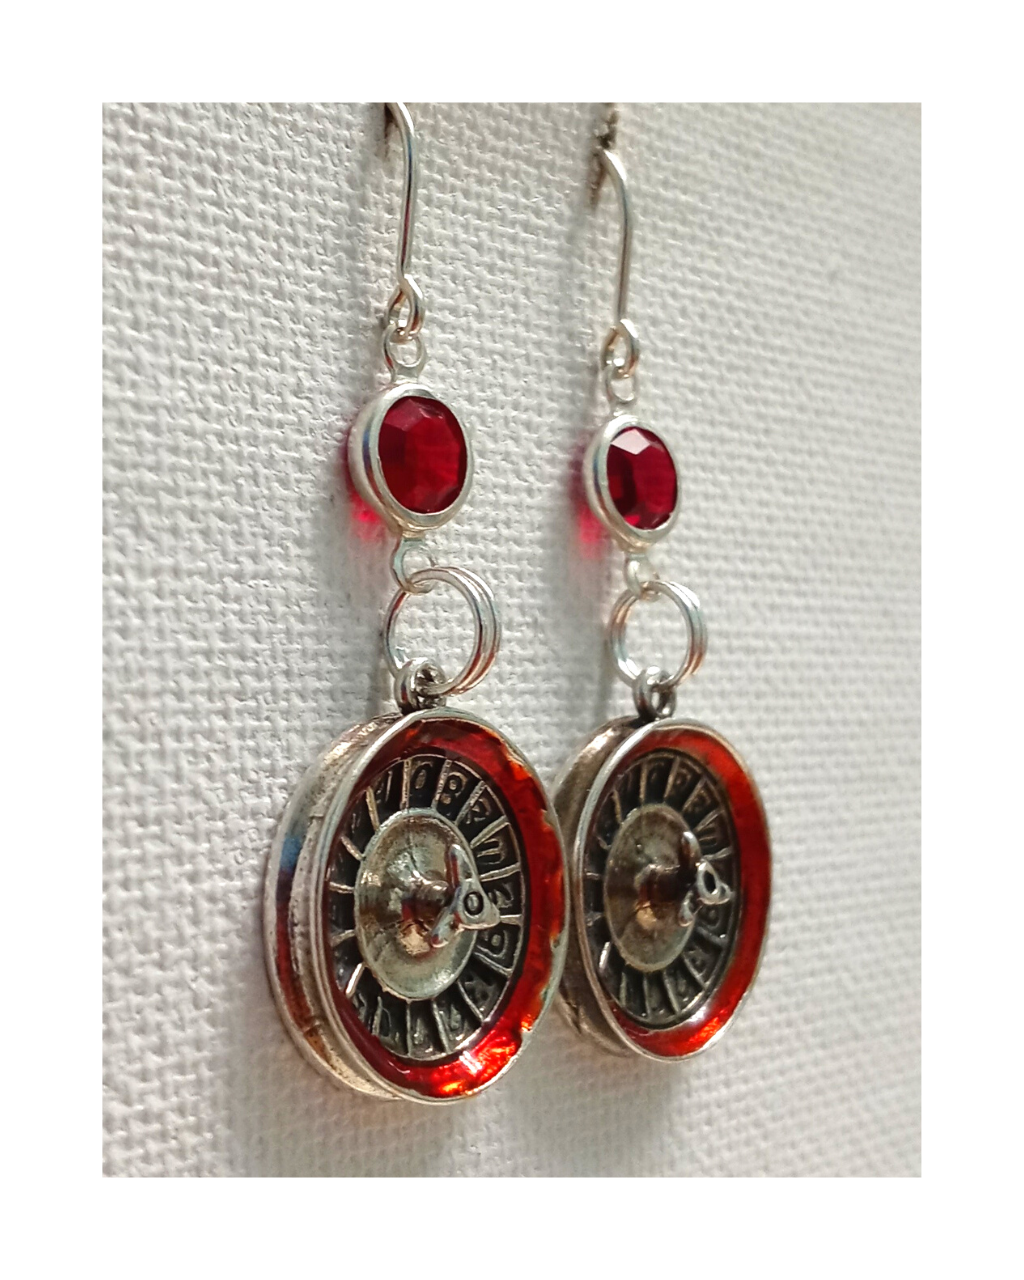 Exclusive Sterling 3-D Hand-enameled Roulette Wheel with Swarovski Crystal Earrings 1 15/16"L X 3/4"W